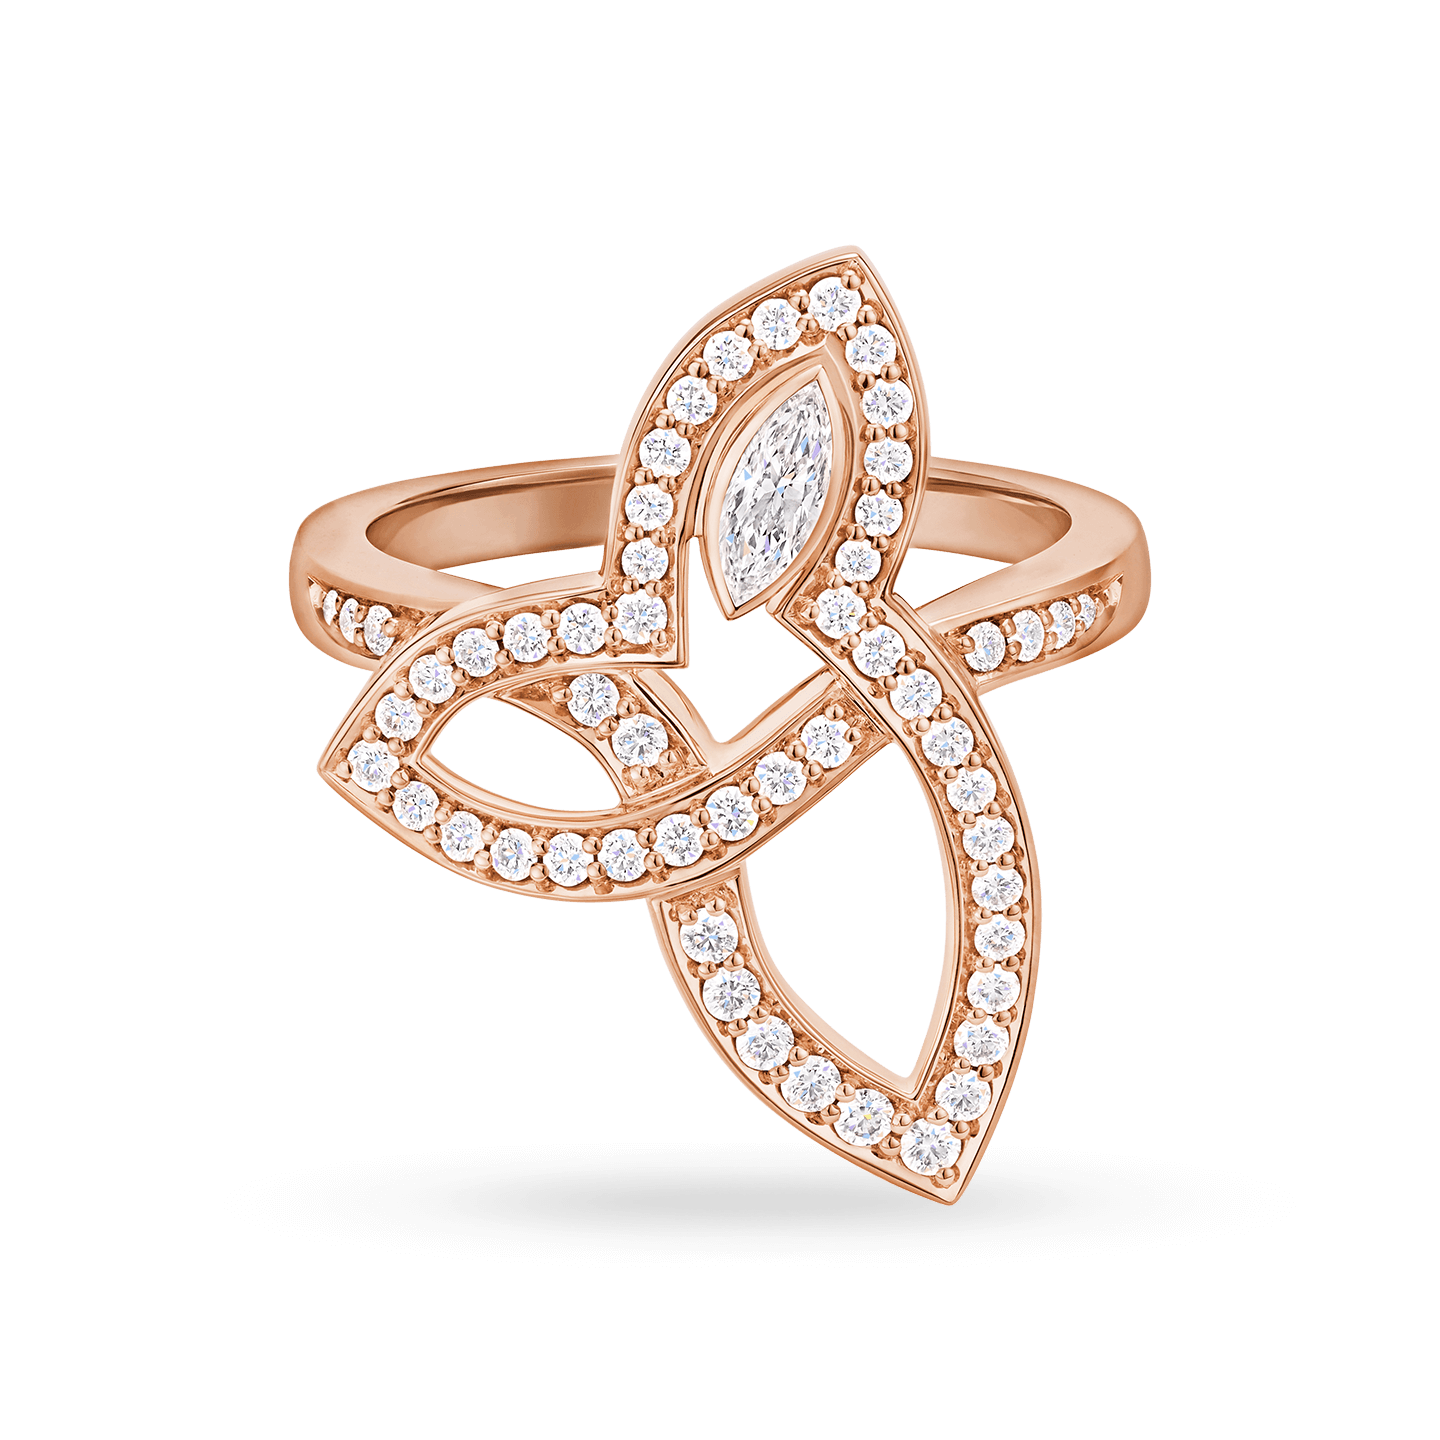 Lily Cluster Diamond Ring in Rose Gold, Product Image 1